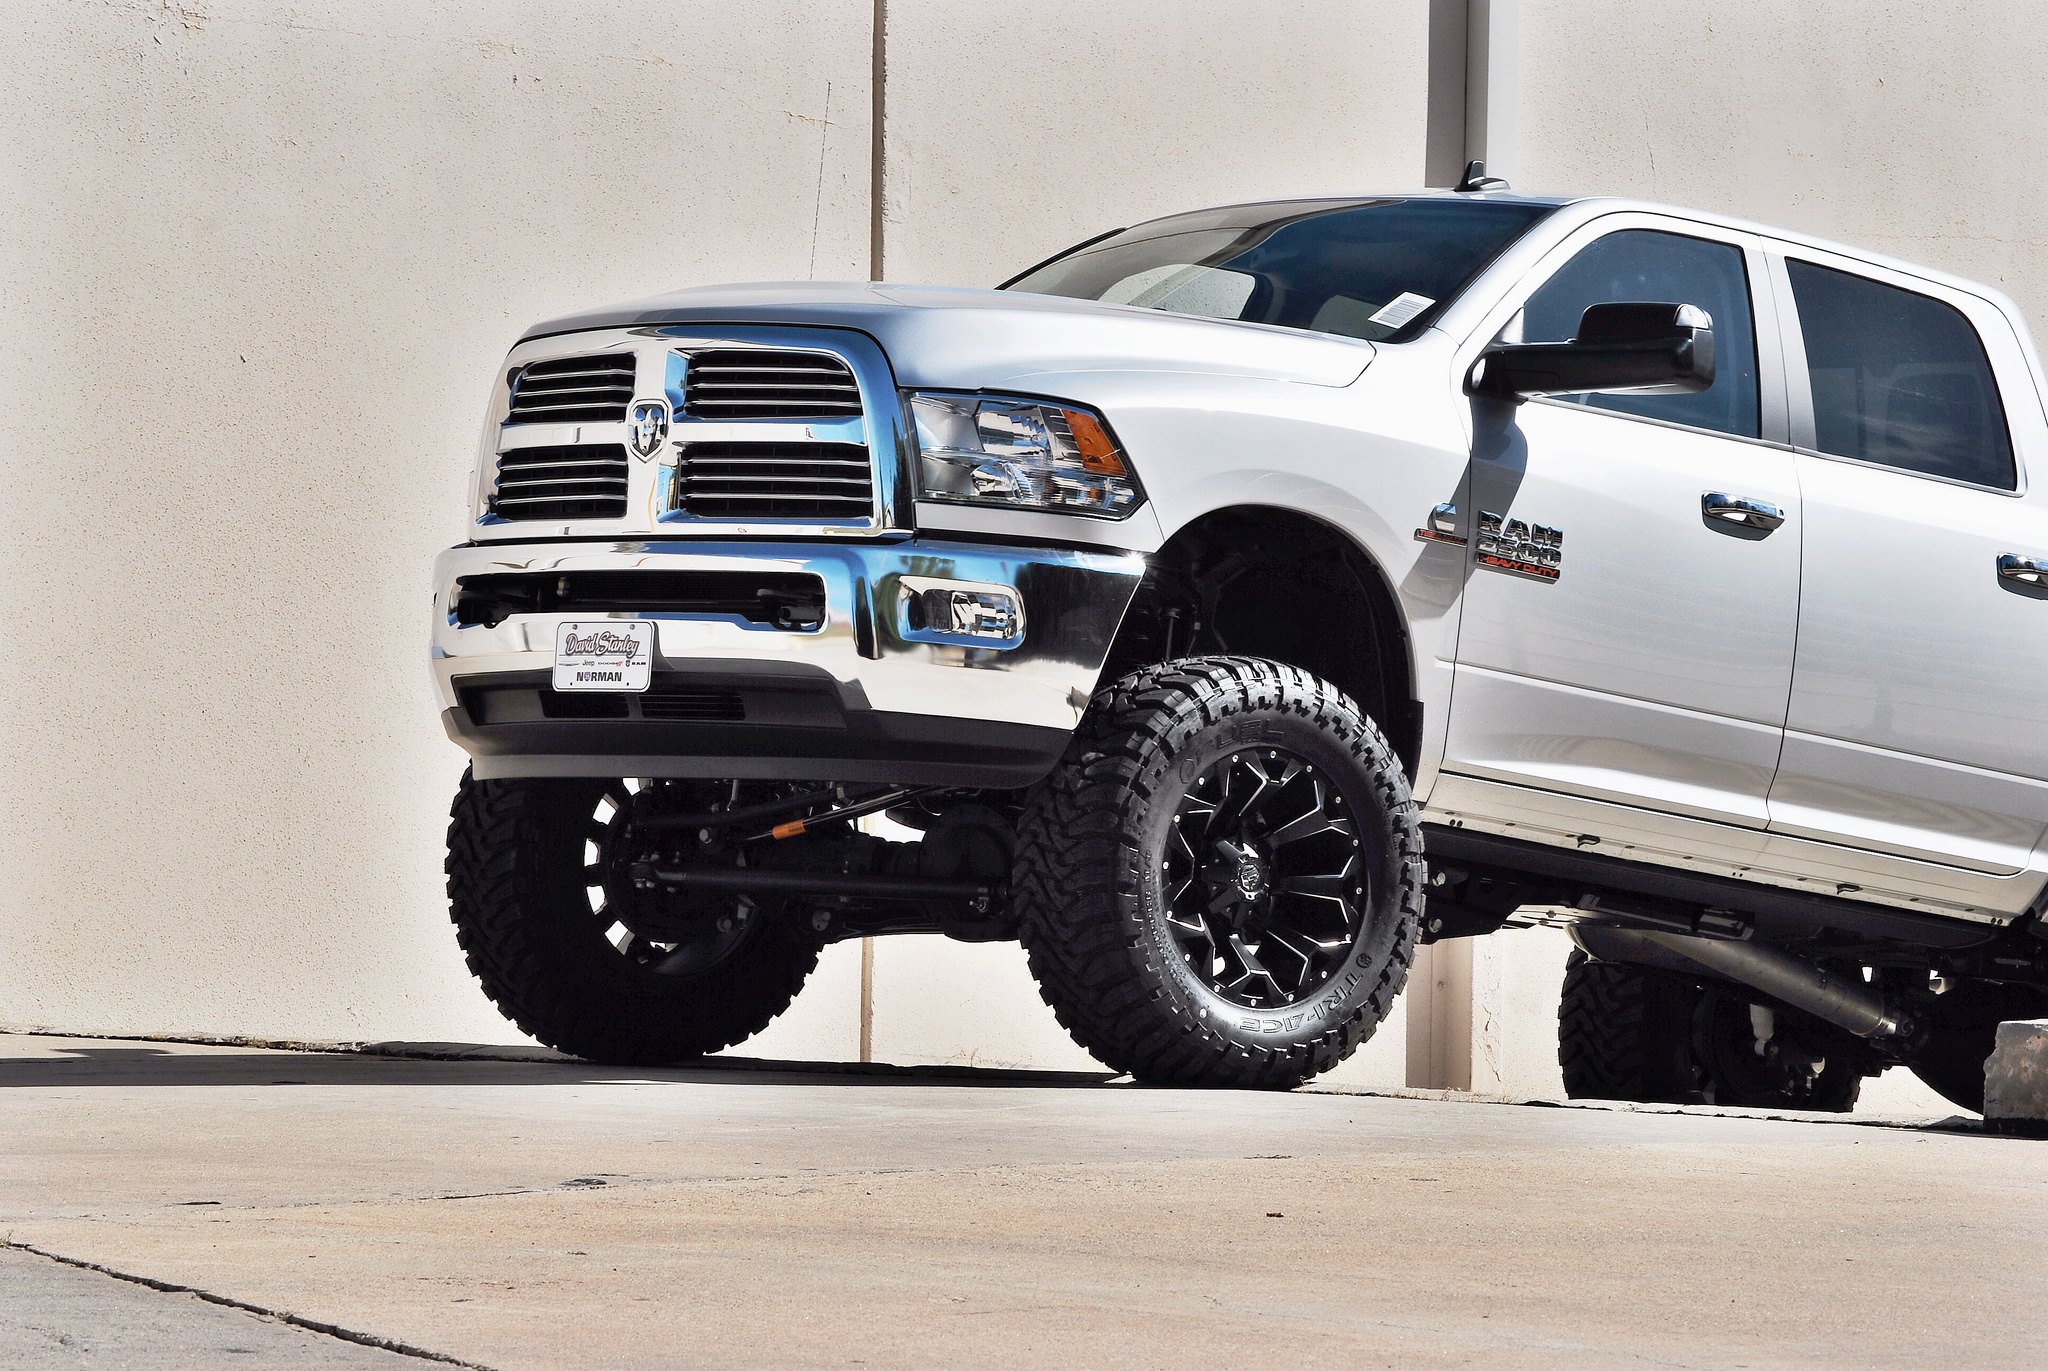 Aftermarket Front Bumper on White Lifted Dodge Ram - Photo by Fuel Offroad